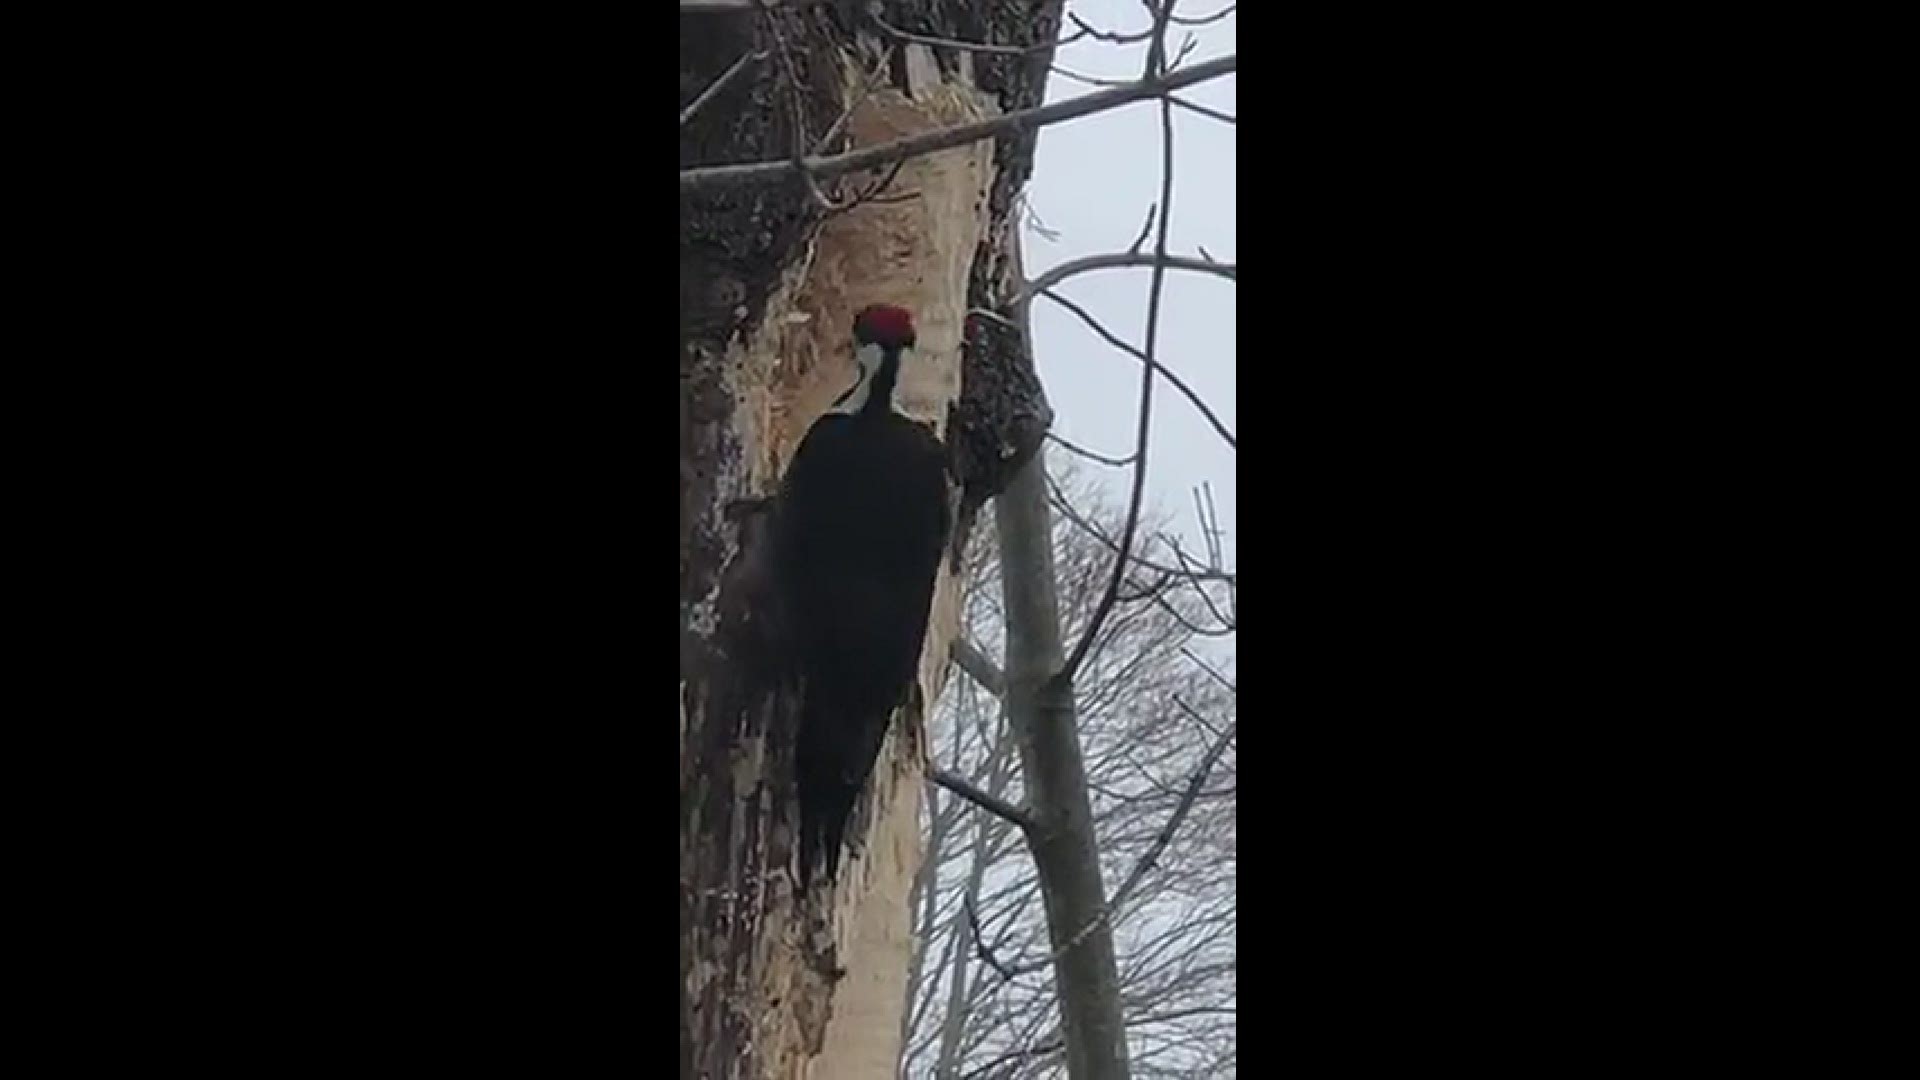 Pileated Woodpecker on Valentines Day
Credit: Reed Nickles